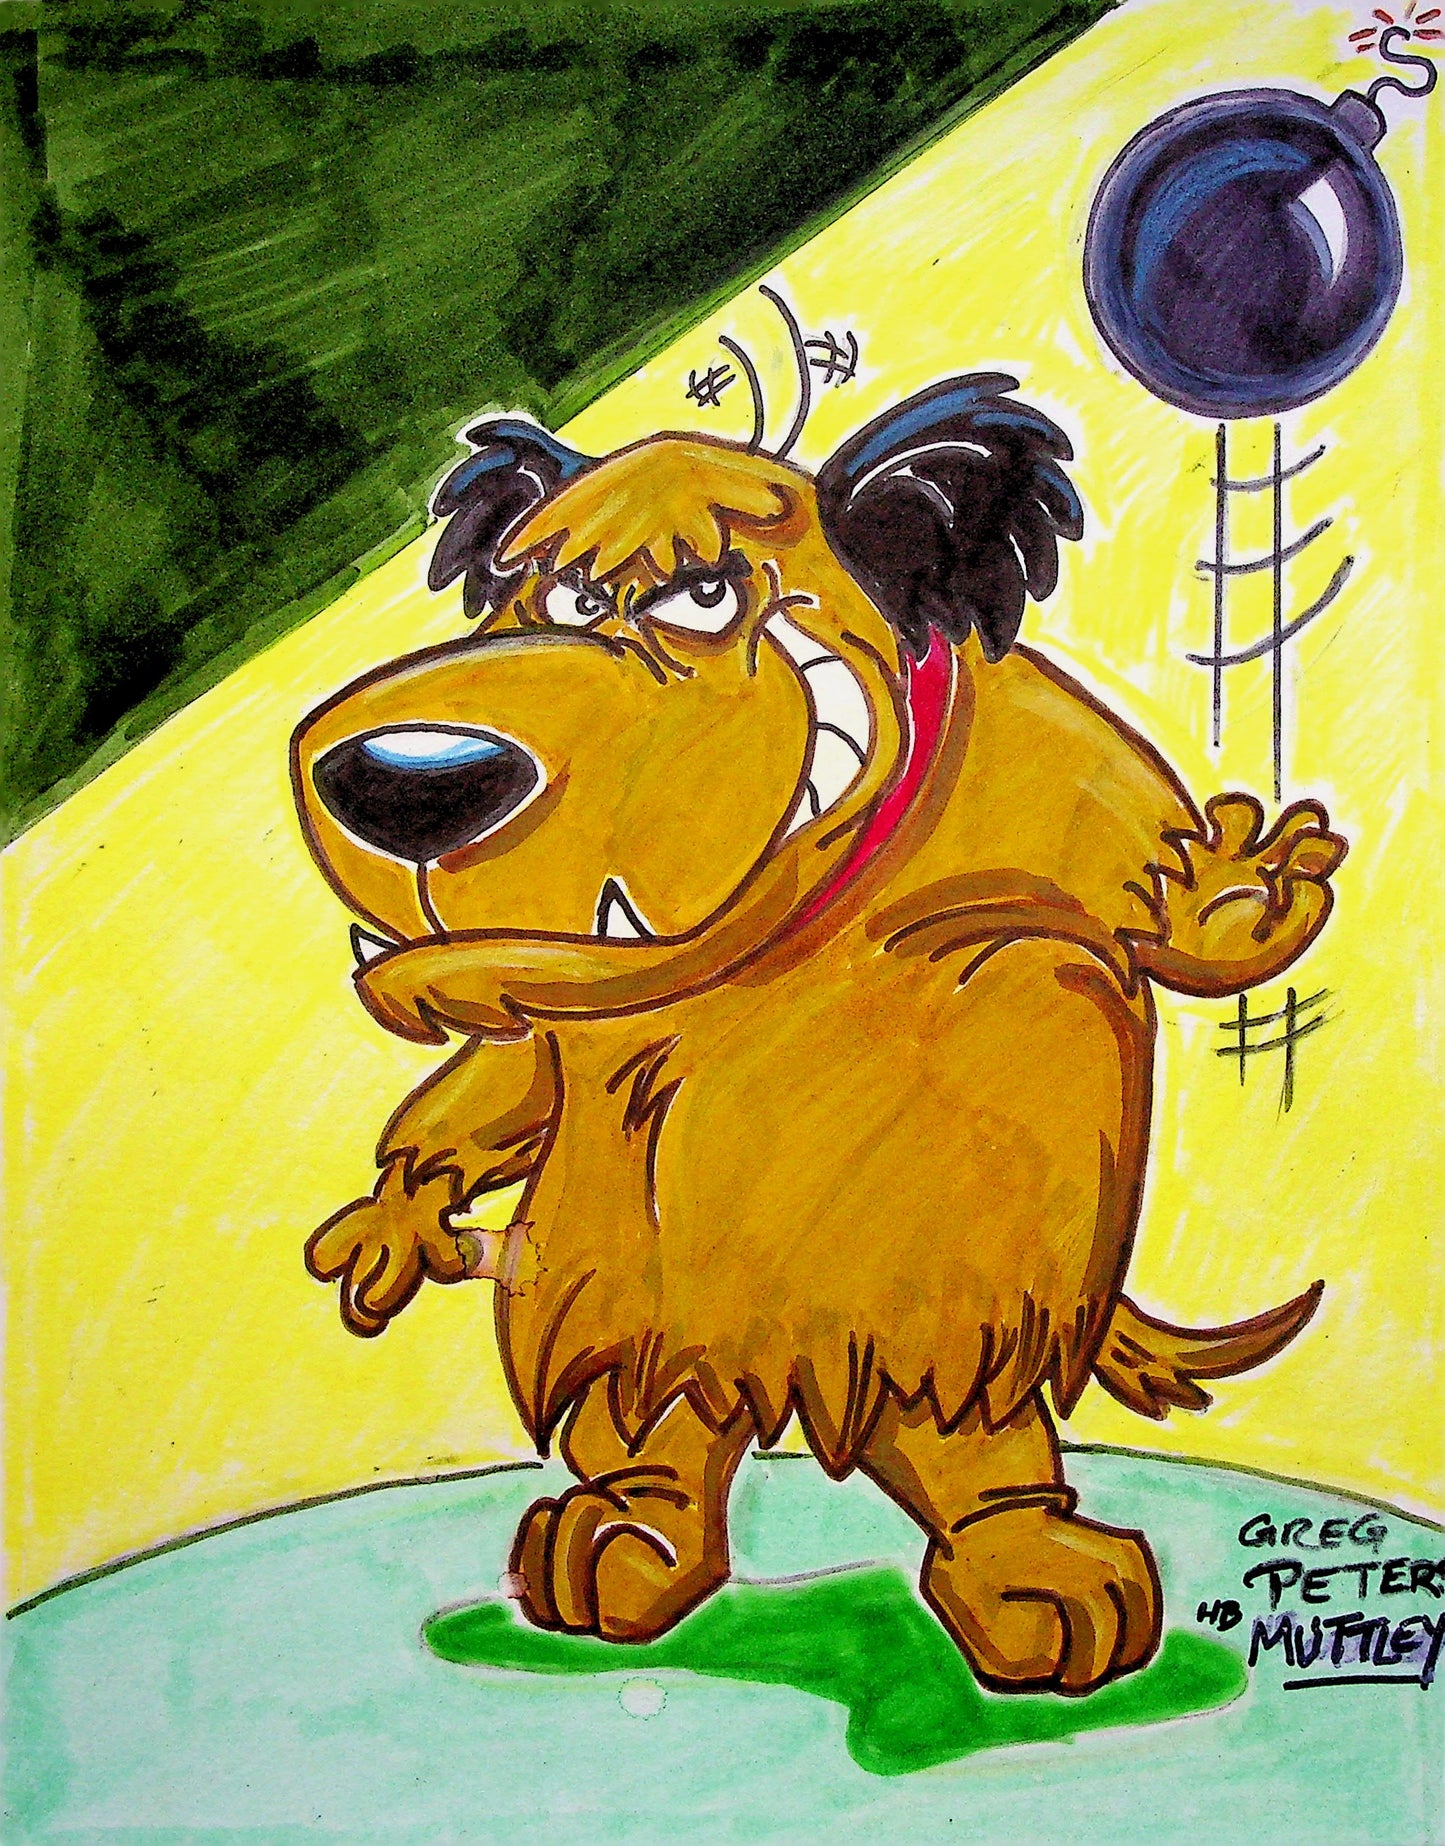 Greg Peters Signed MUTTLEY Hand Painted Animation Art